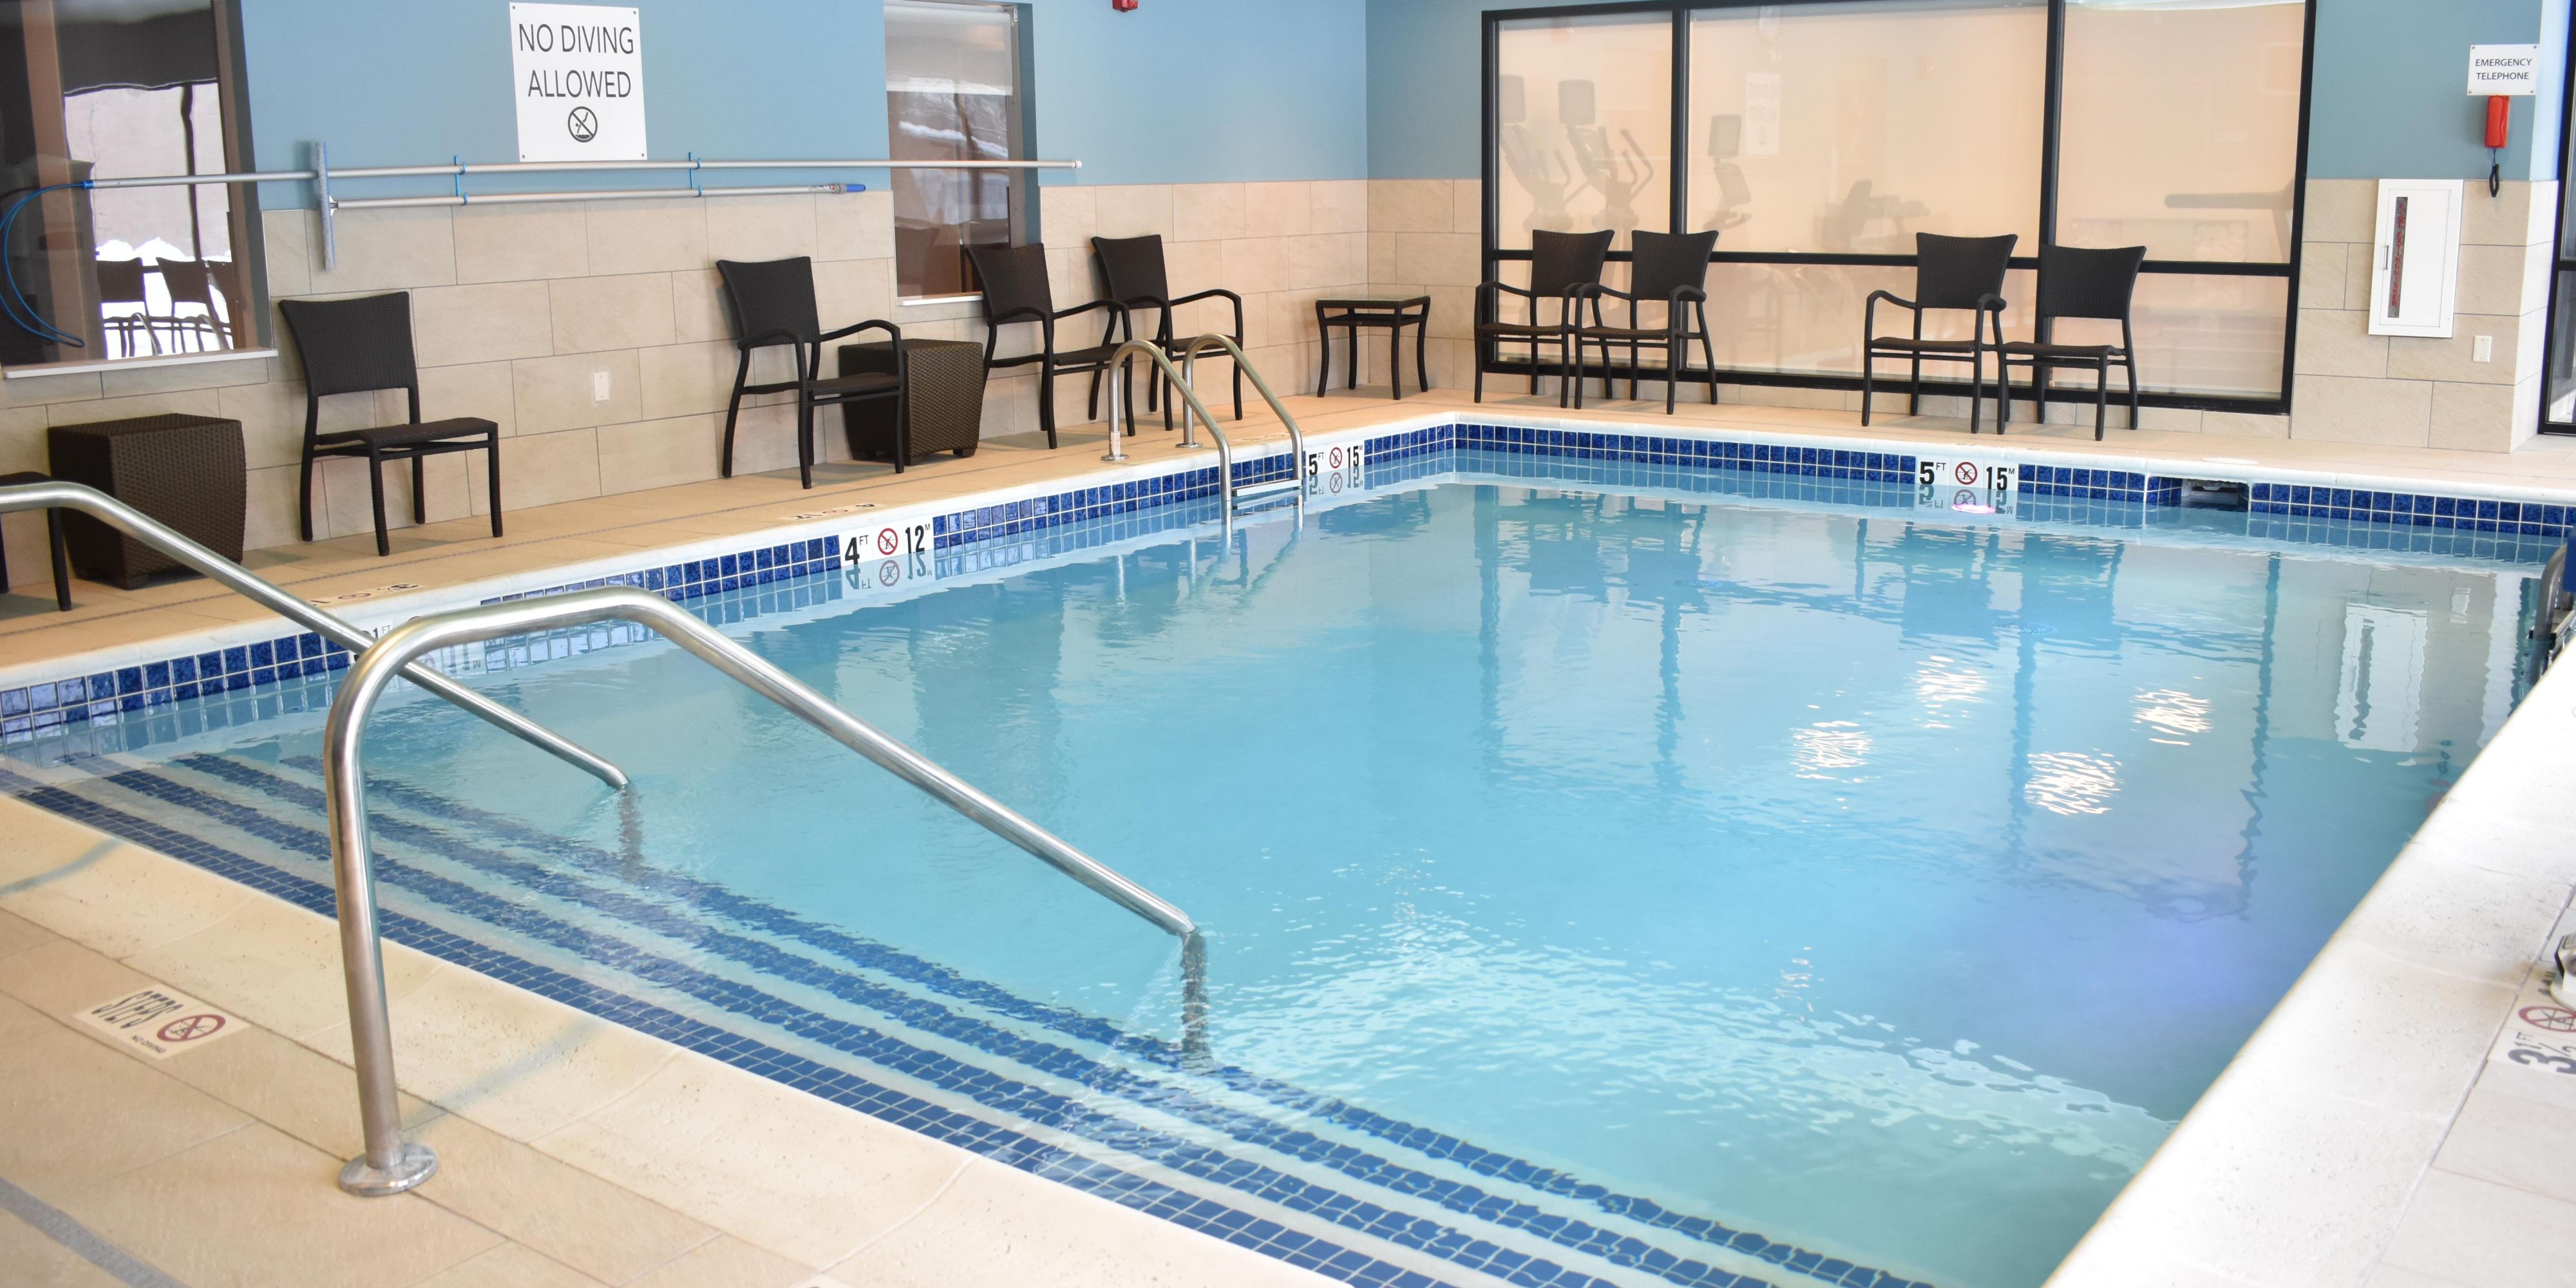 Make sure you grab your bathing suit to take a dip in our saltwater pool! It is indoor and heated for maximum relaxation.